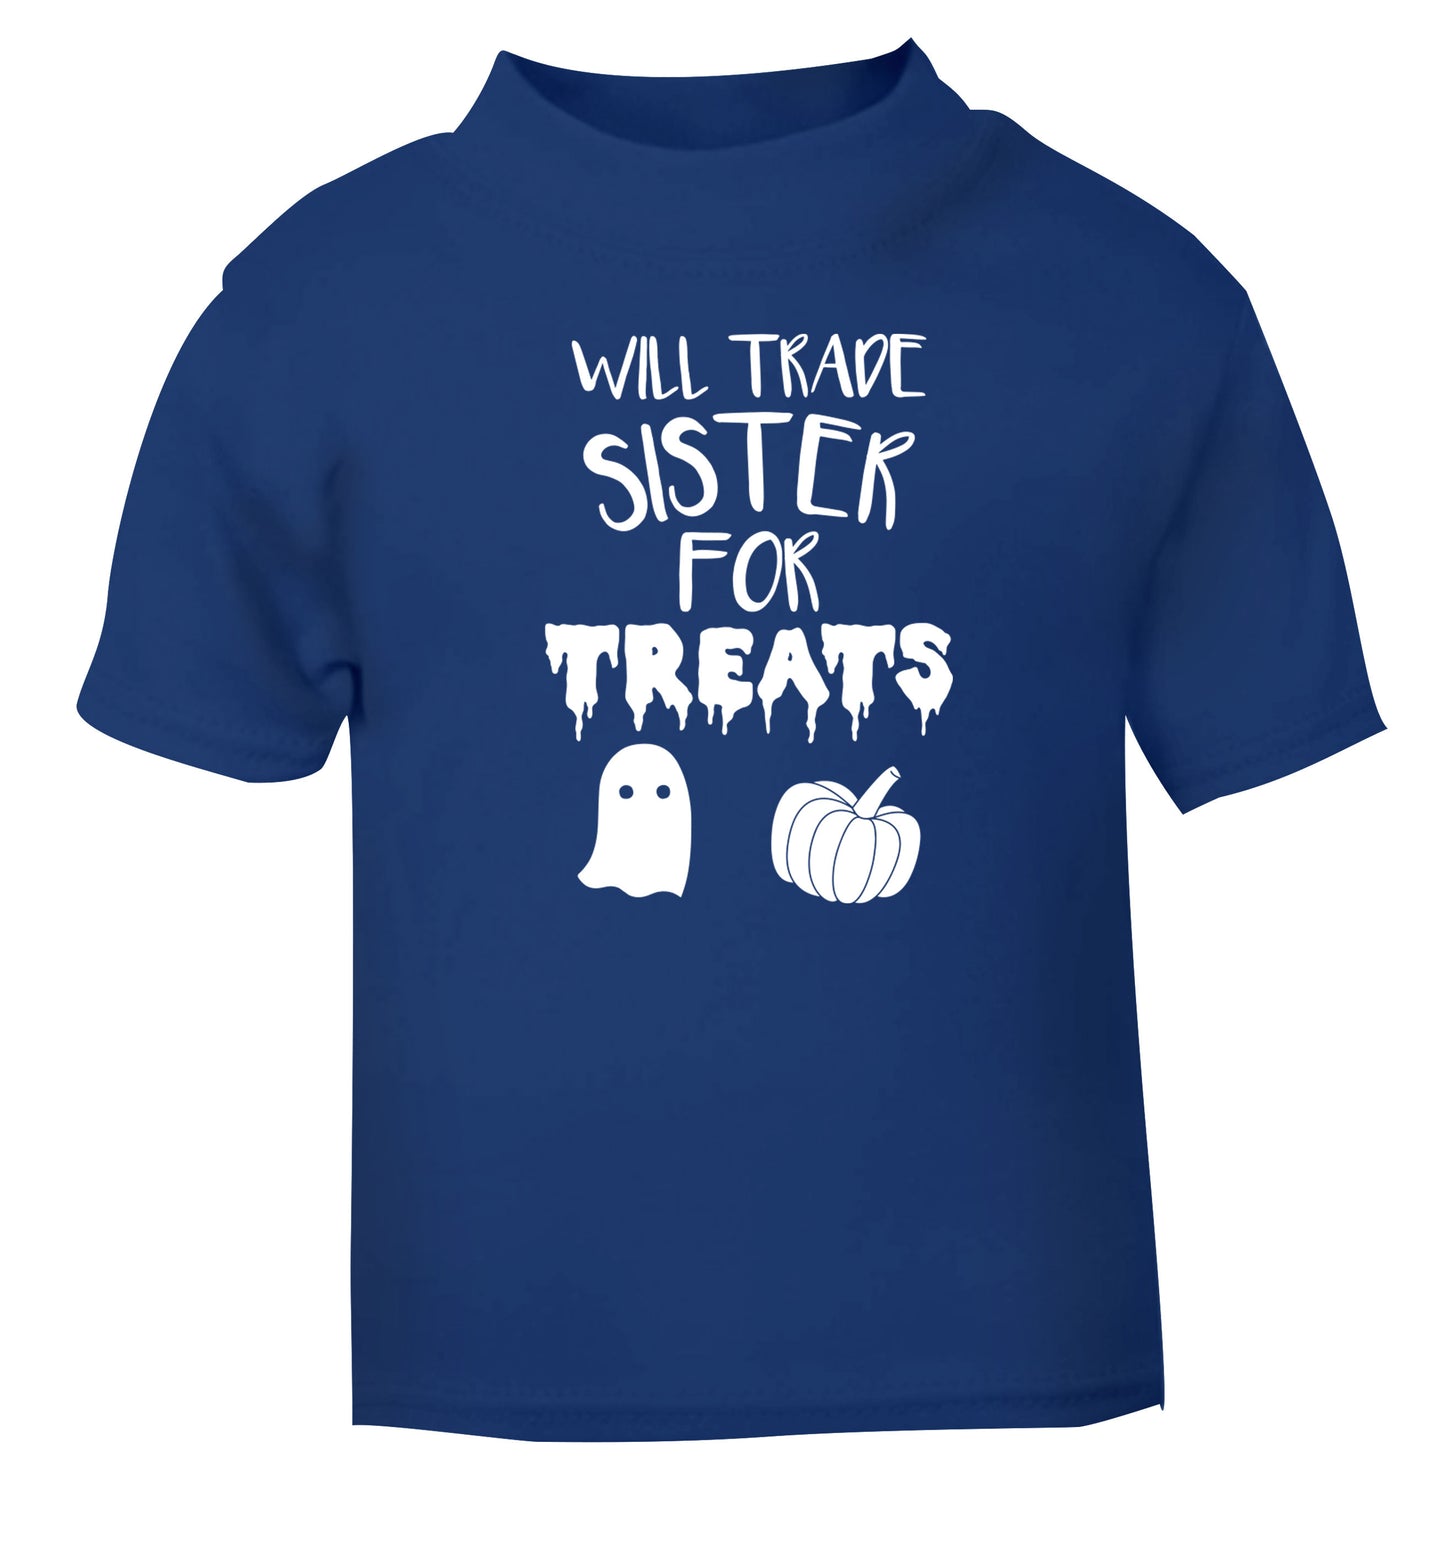 Will trade sister for treats blue Baby Toddler Tshirt 2 Years